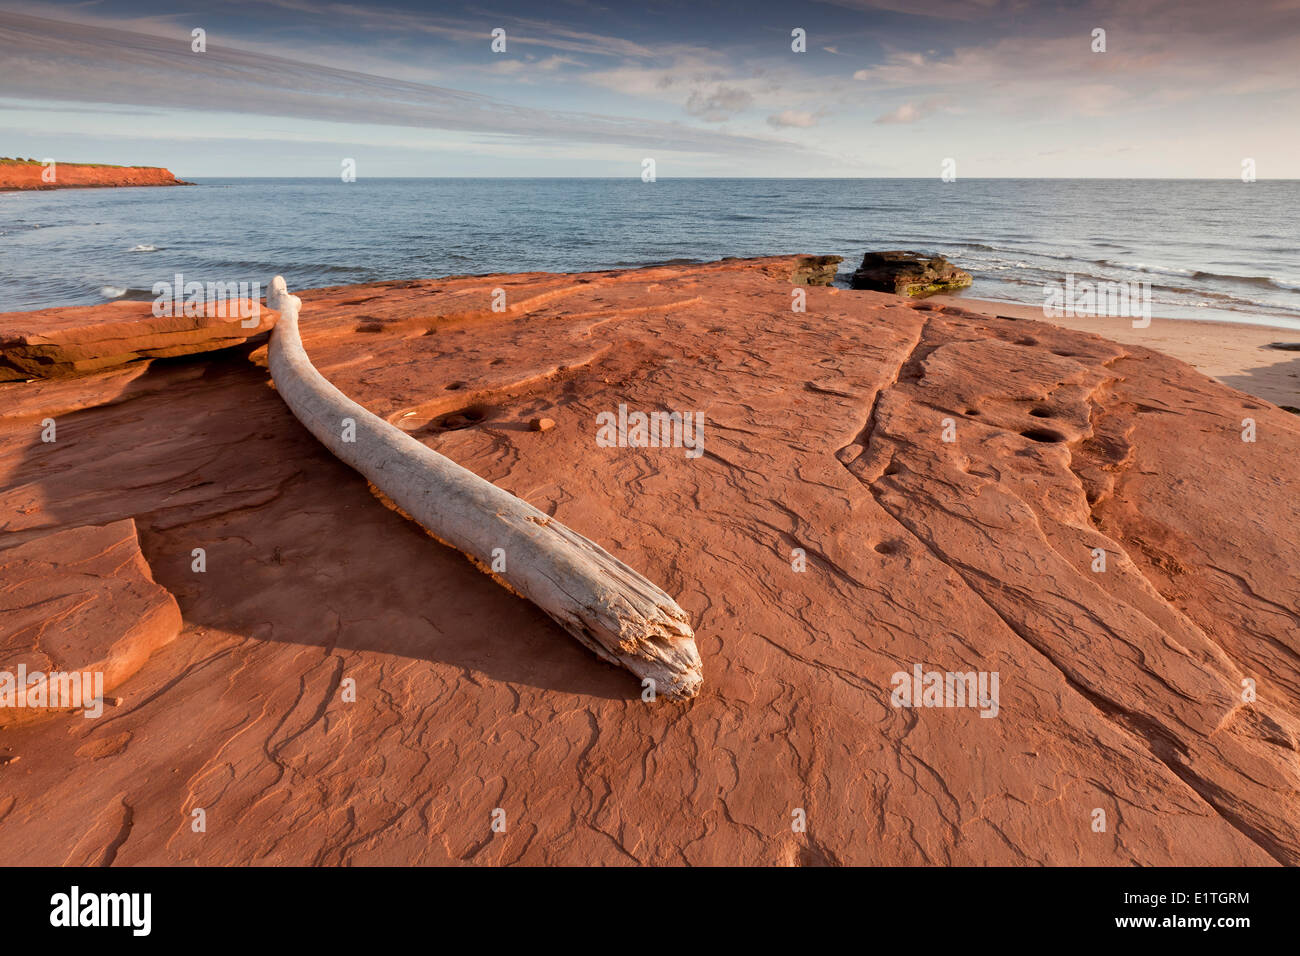 Driftwood log left behind by the tide waves on the red shore in the Cavendish (Orby Head) area Prince Edward Island National Stock Photo